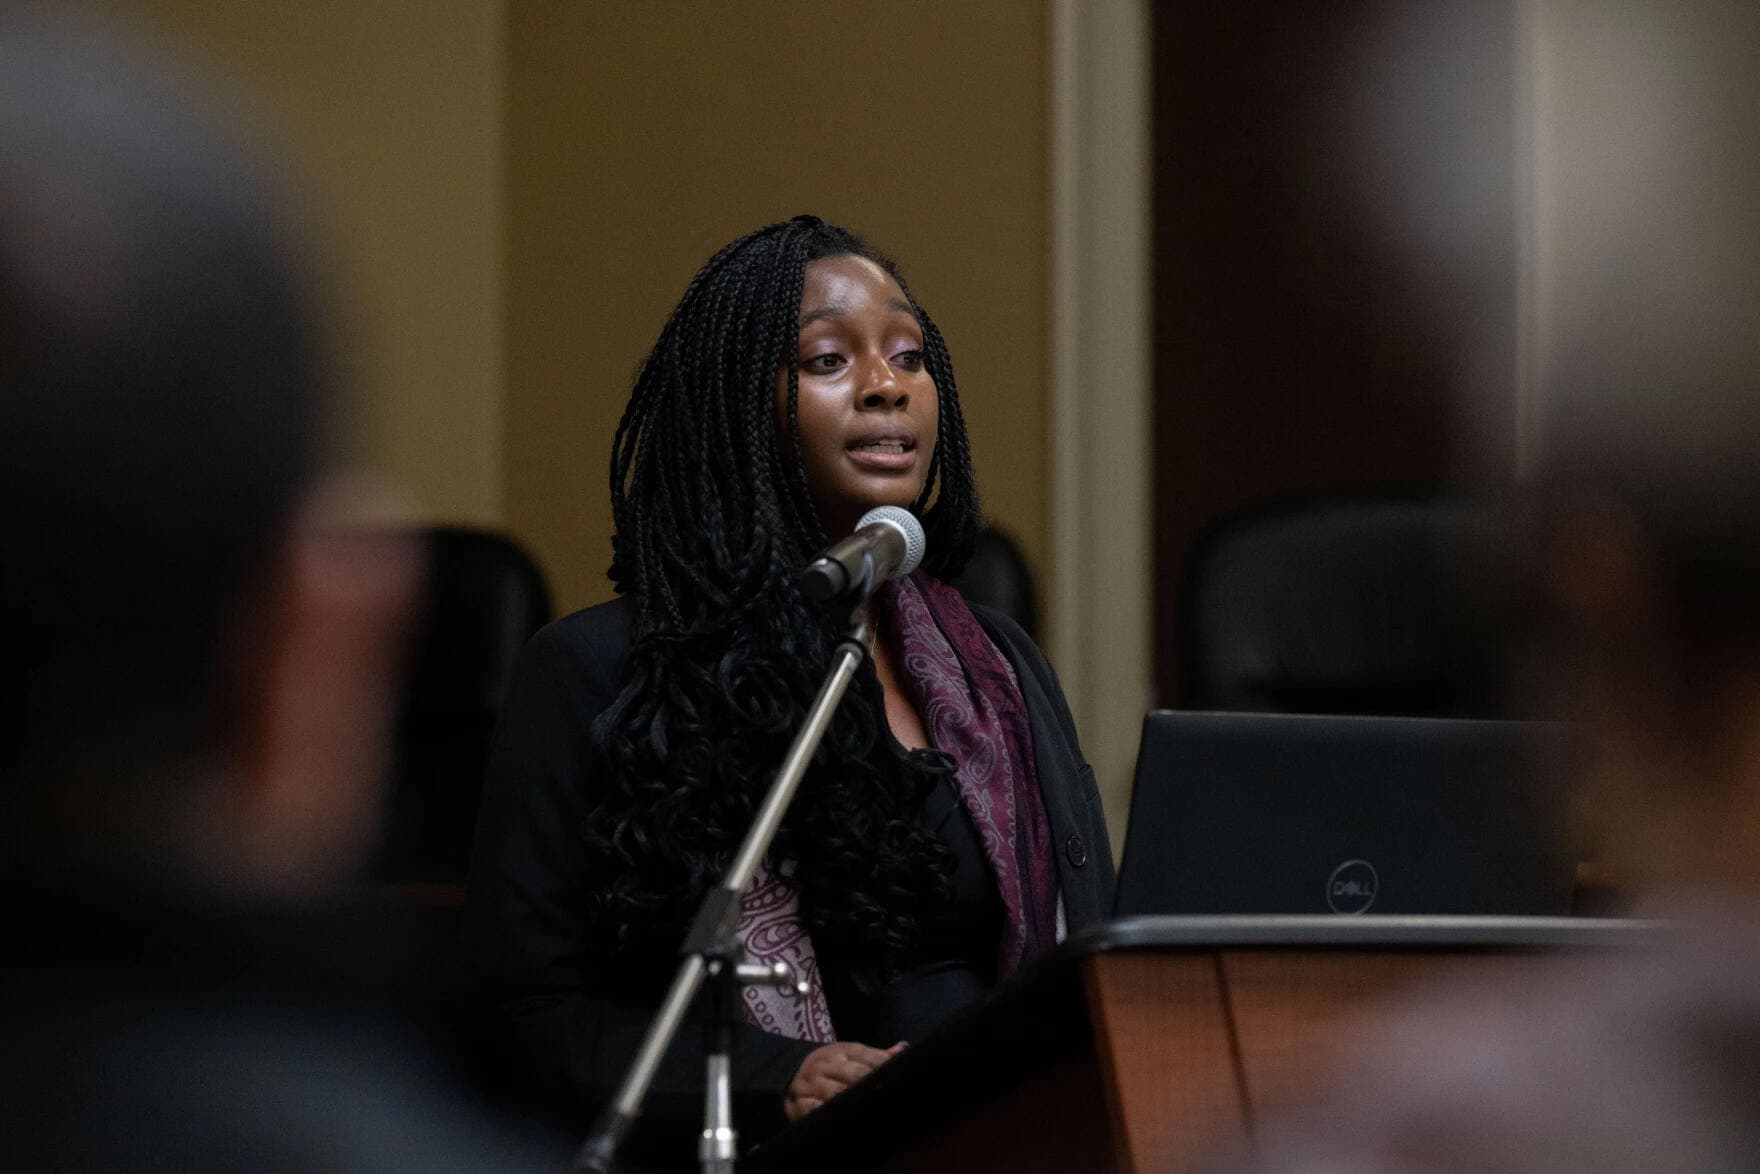 Doria Brown, energy manager of the city of Nashua, speaks on April 5, during a meeting about community power at City Hall in Nashua, N.H. (Raquel C. Zaldívar/New England News Collaborative)